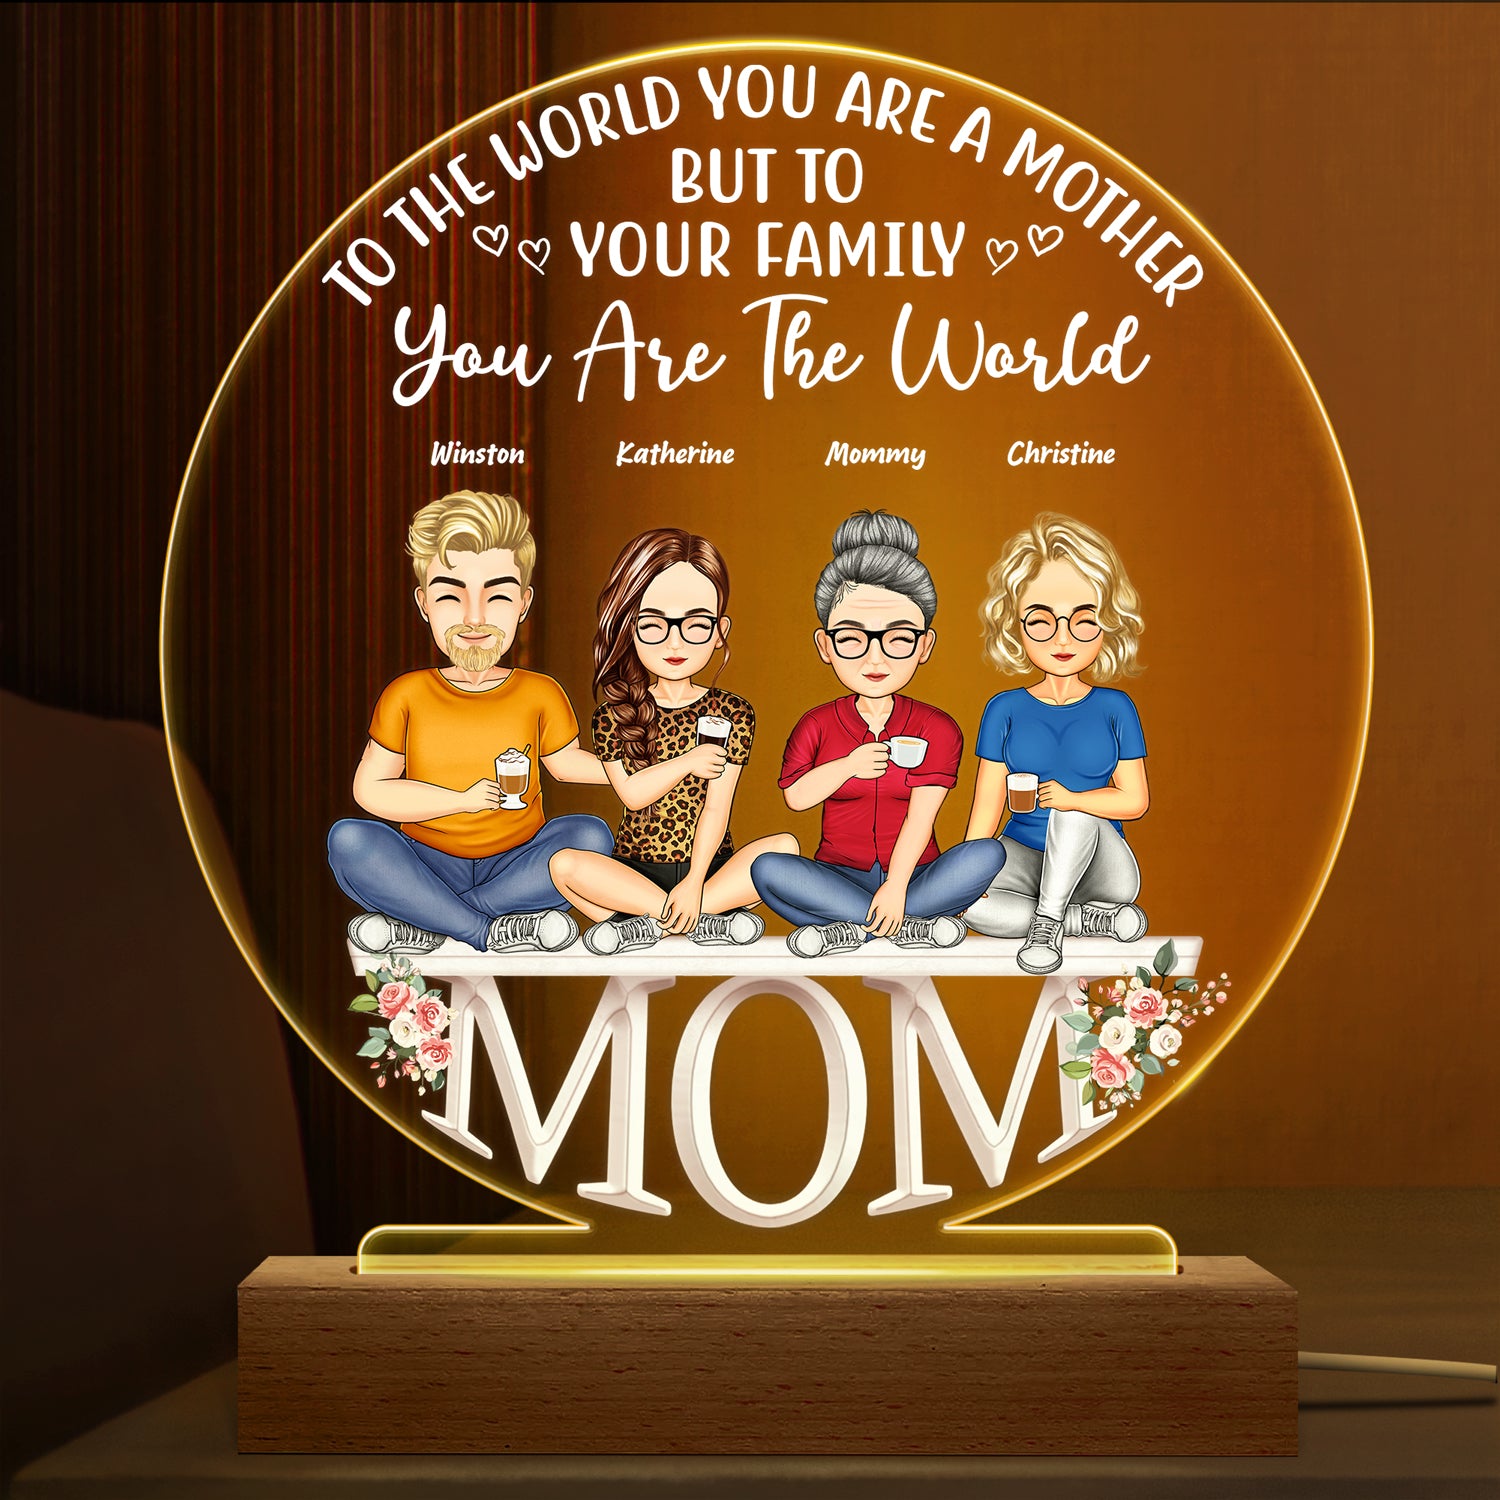 To The World You Are A Mother - Birthday, Loving Gift For Mommy, Mother, Grandma, Grandmother - Personalized Custom 3D Led Light Wooden Base